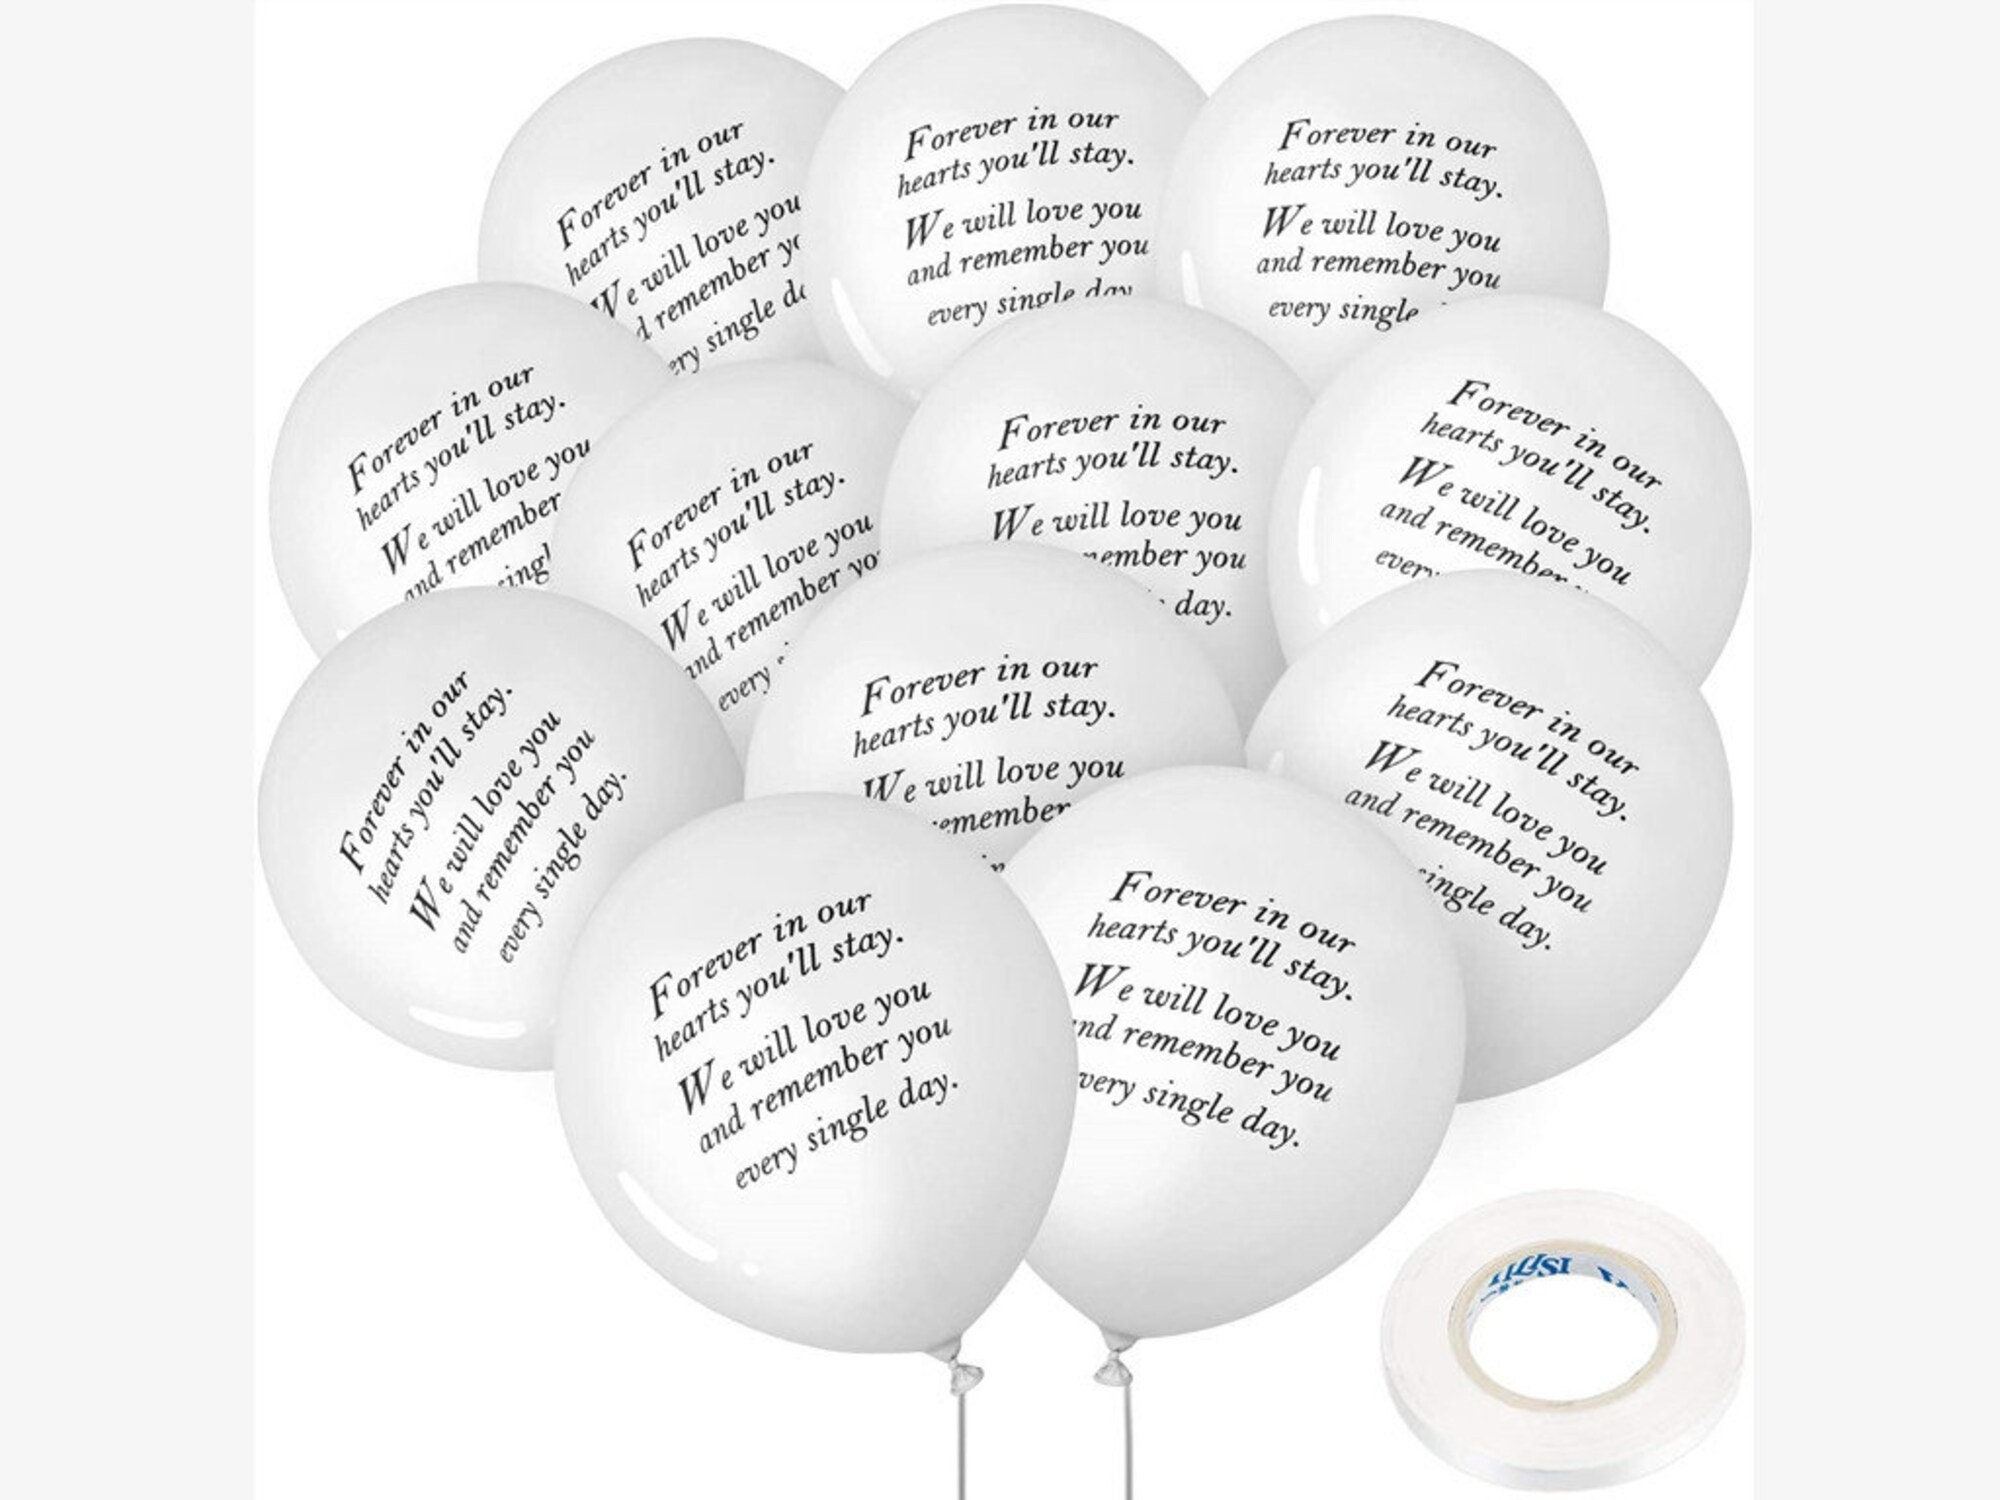 Memorial Balloons For Release Biodegradable Remembrance Angel Balloons To  Release In Sky Memorial Decorations For Celebration Of Life RIP Rest In